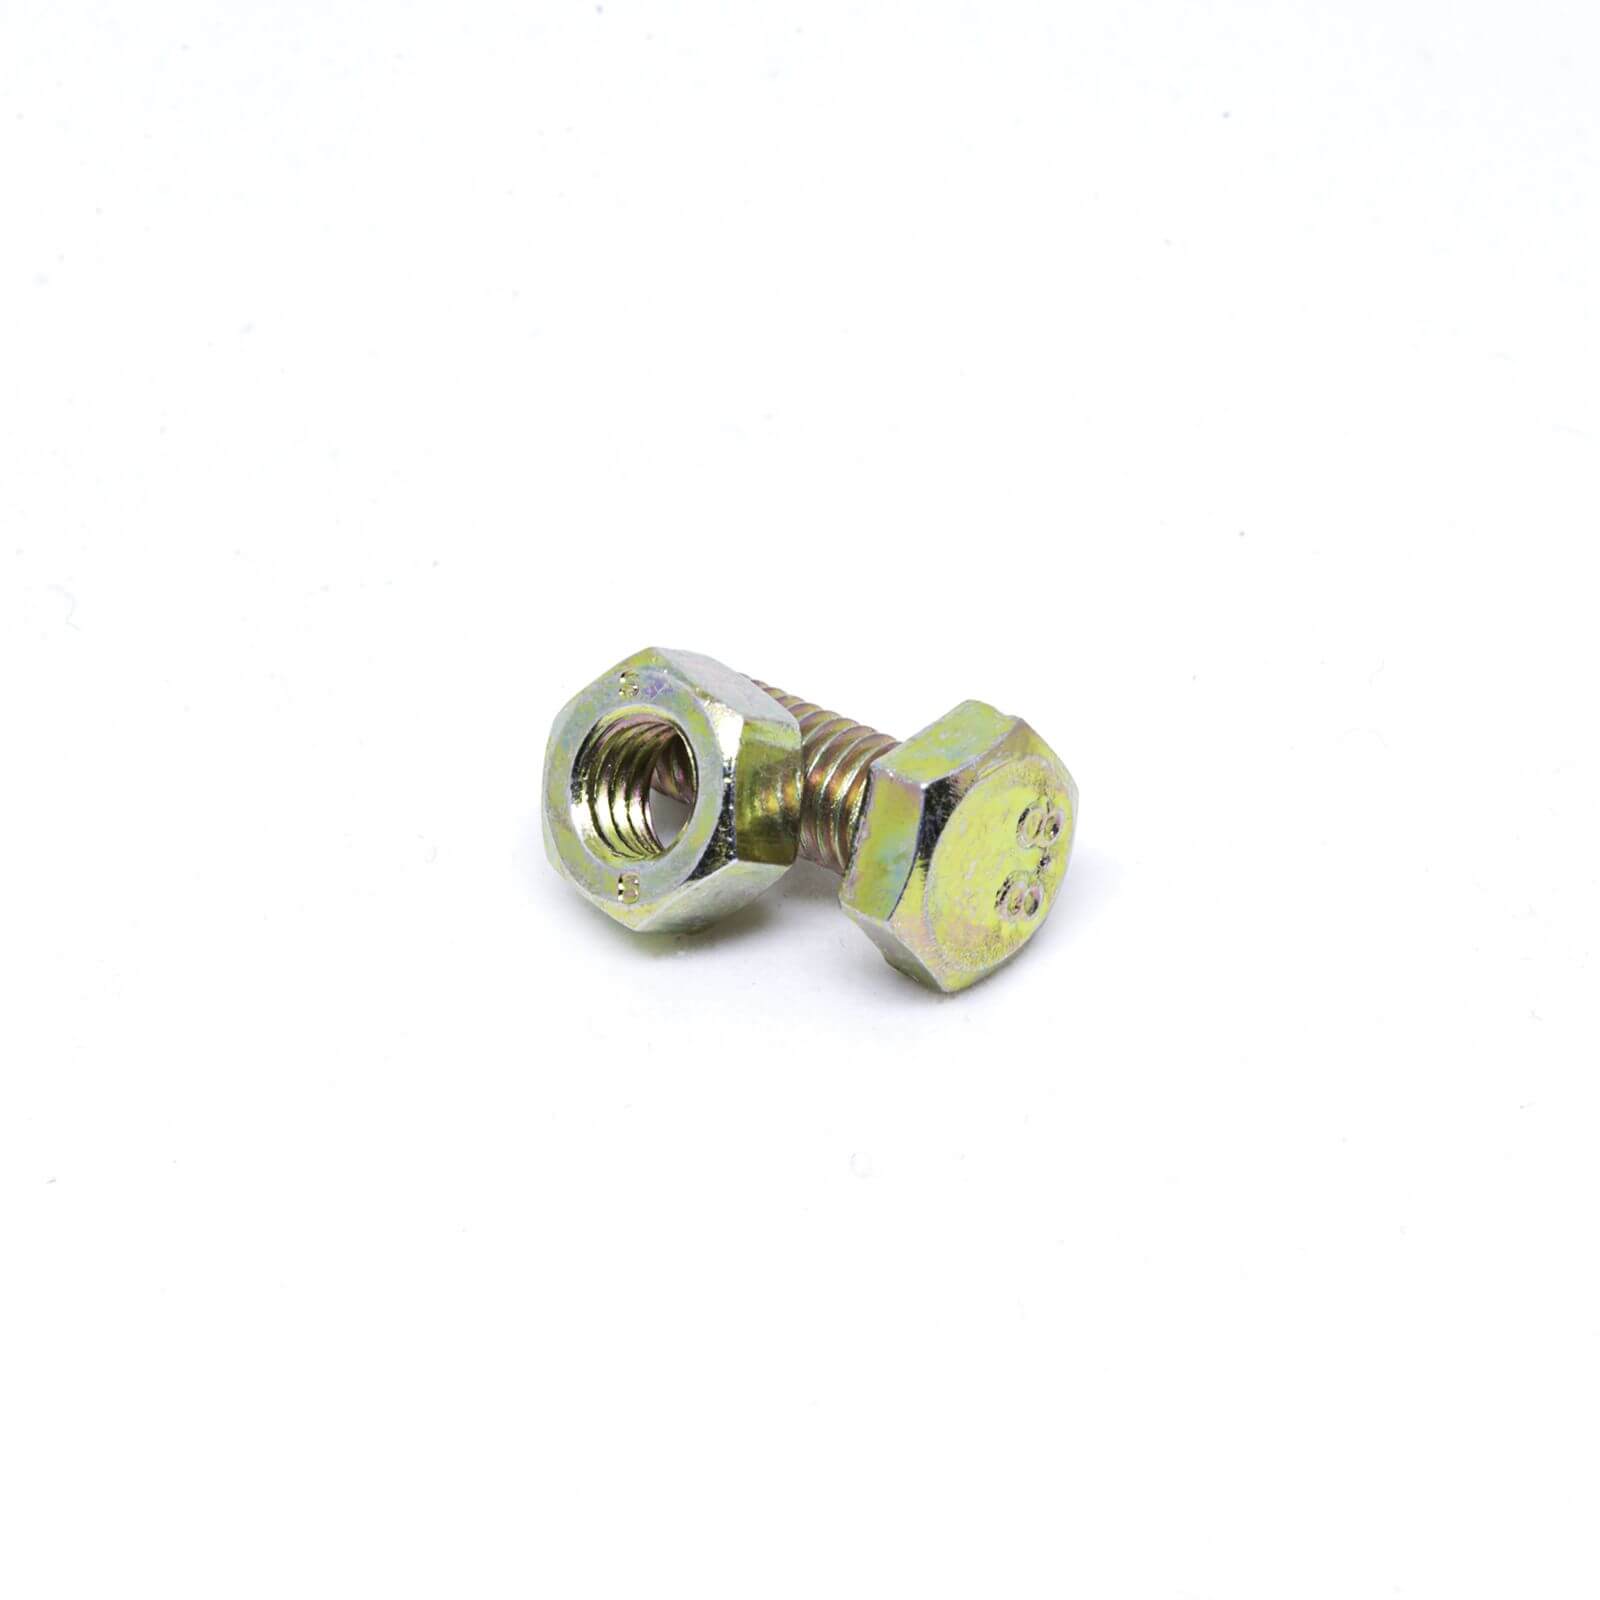 Pinnacle High Tensile Bolts and Nuts - 5 x 16mm - 10 Pack